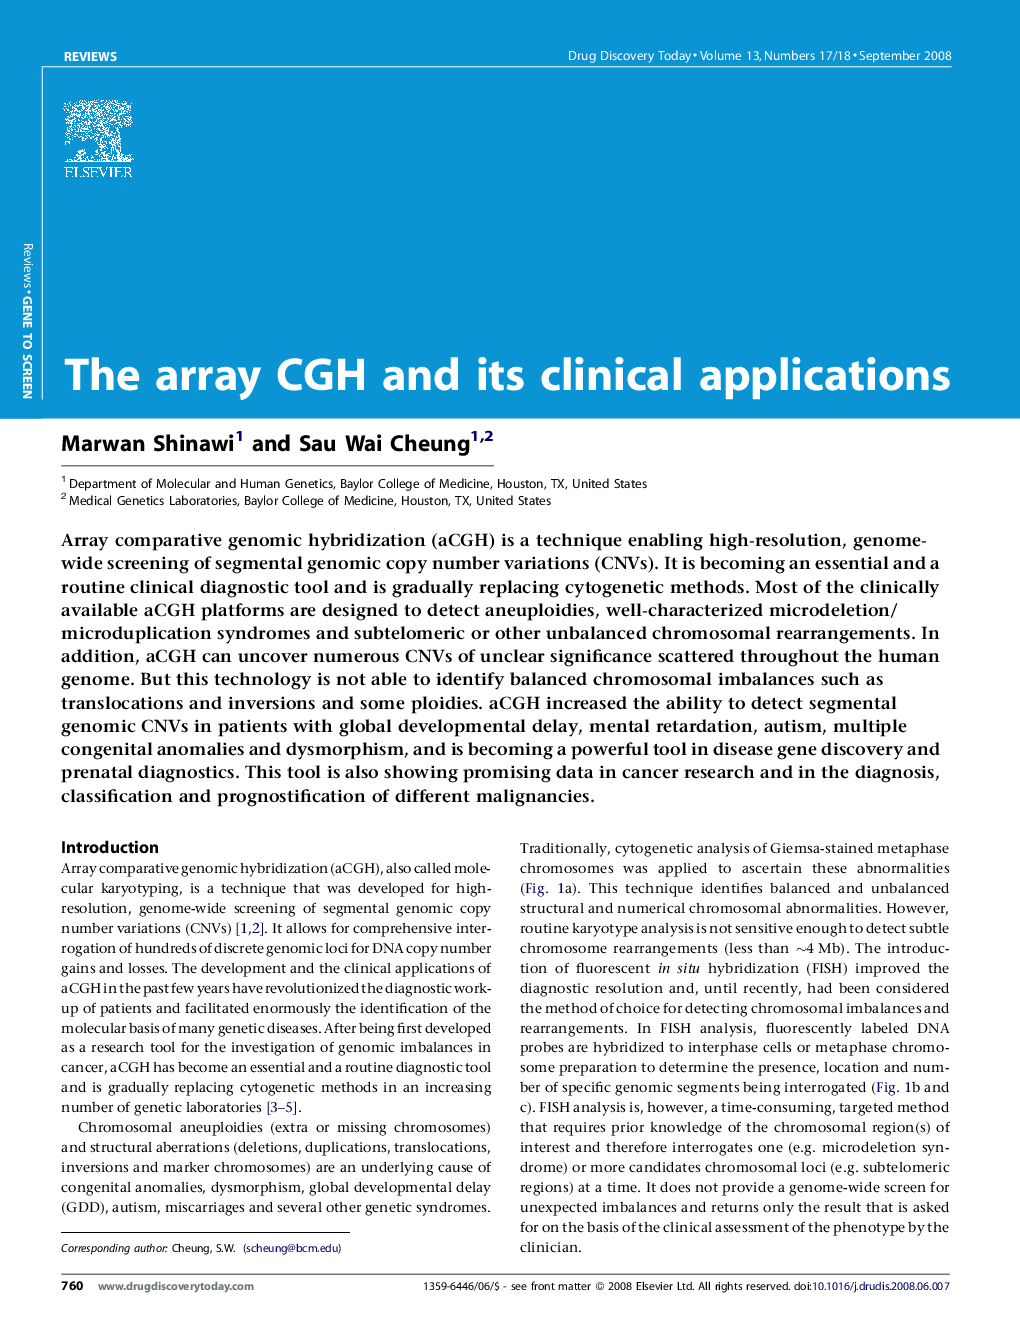 The array CGH and its clinical applications